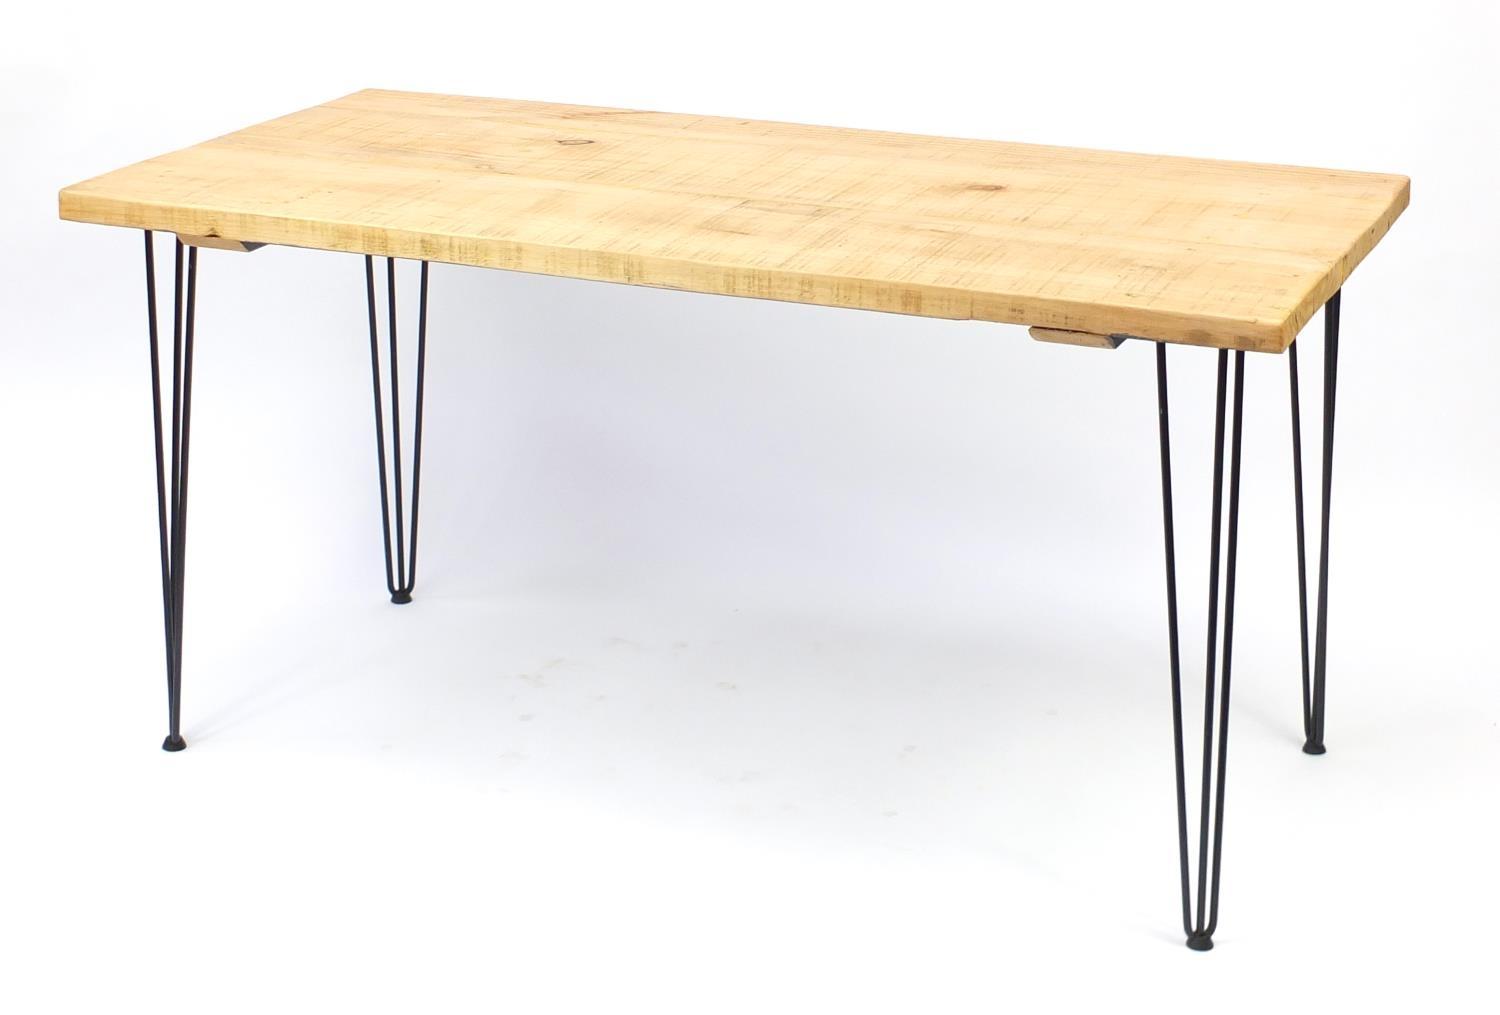 Contemporary light wood dining table with metal hairpin legs, 76c H x 151cm W x 75cm D :For - Image 3 of 4